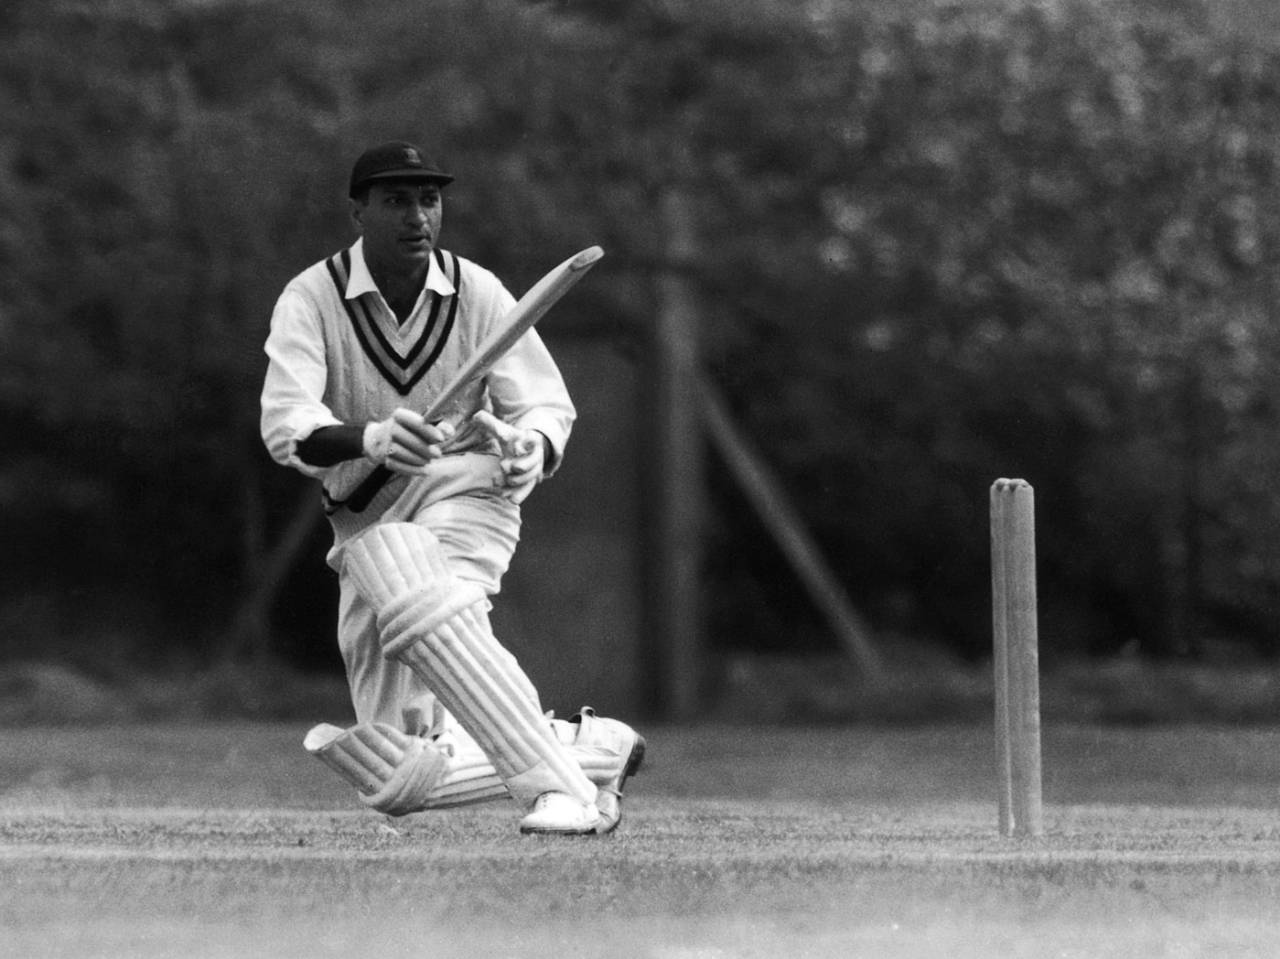 Polly Umrigar bats at a practice session at Osterley, Middlesex, during India's tour of England, April 23, 1959